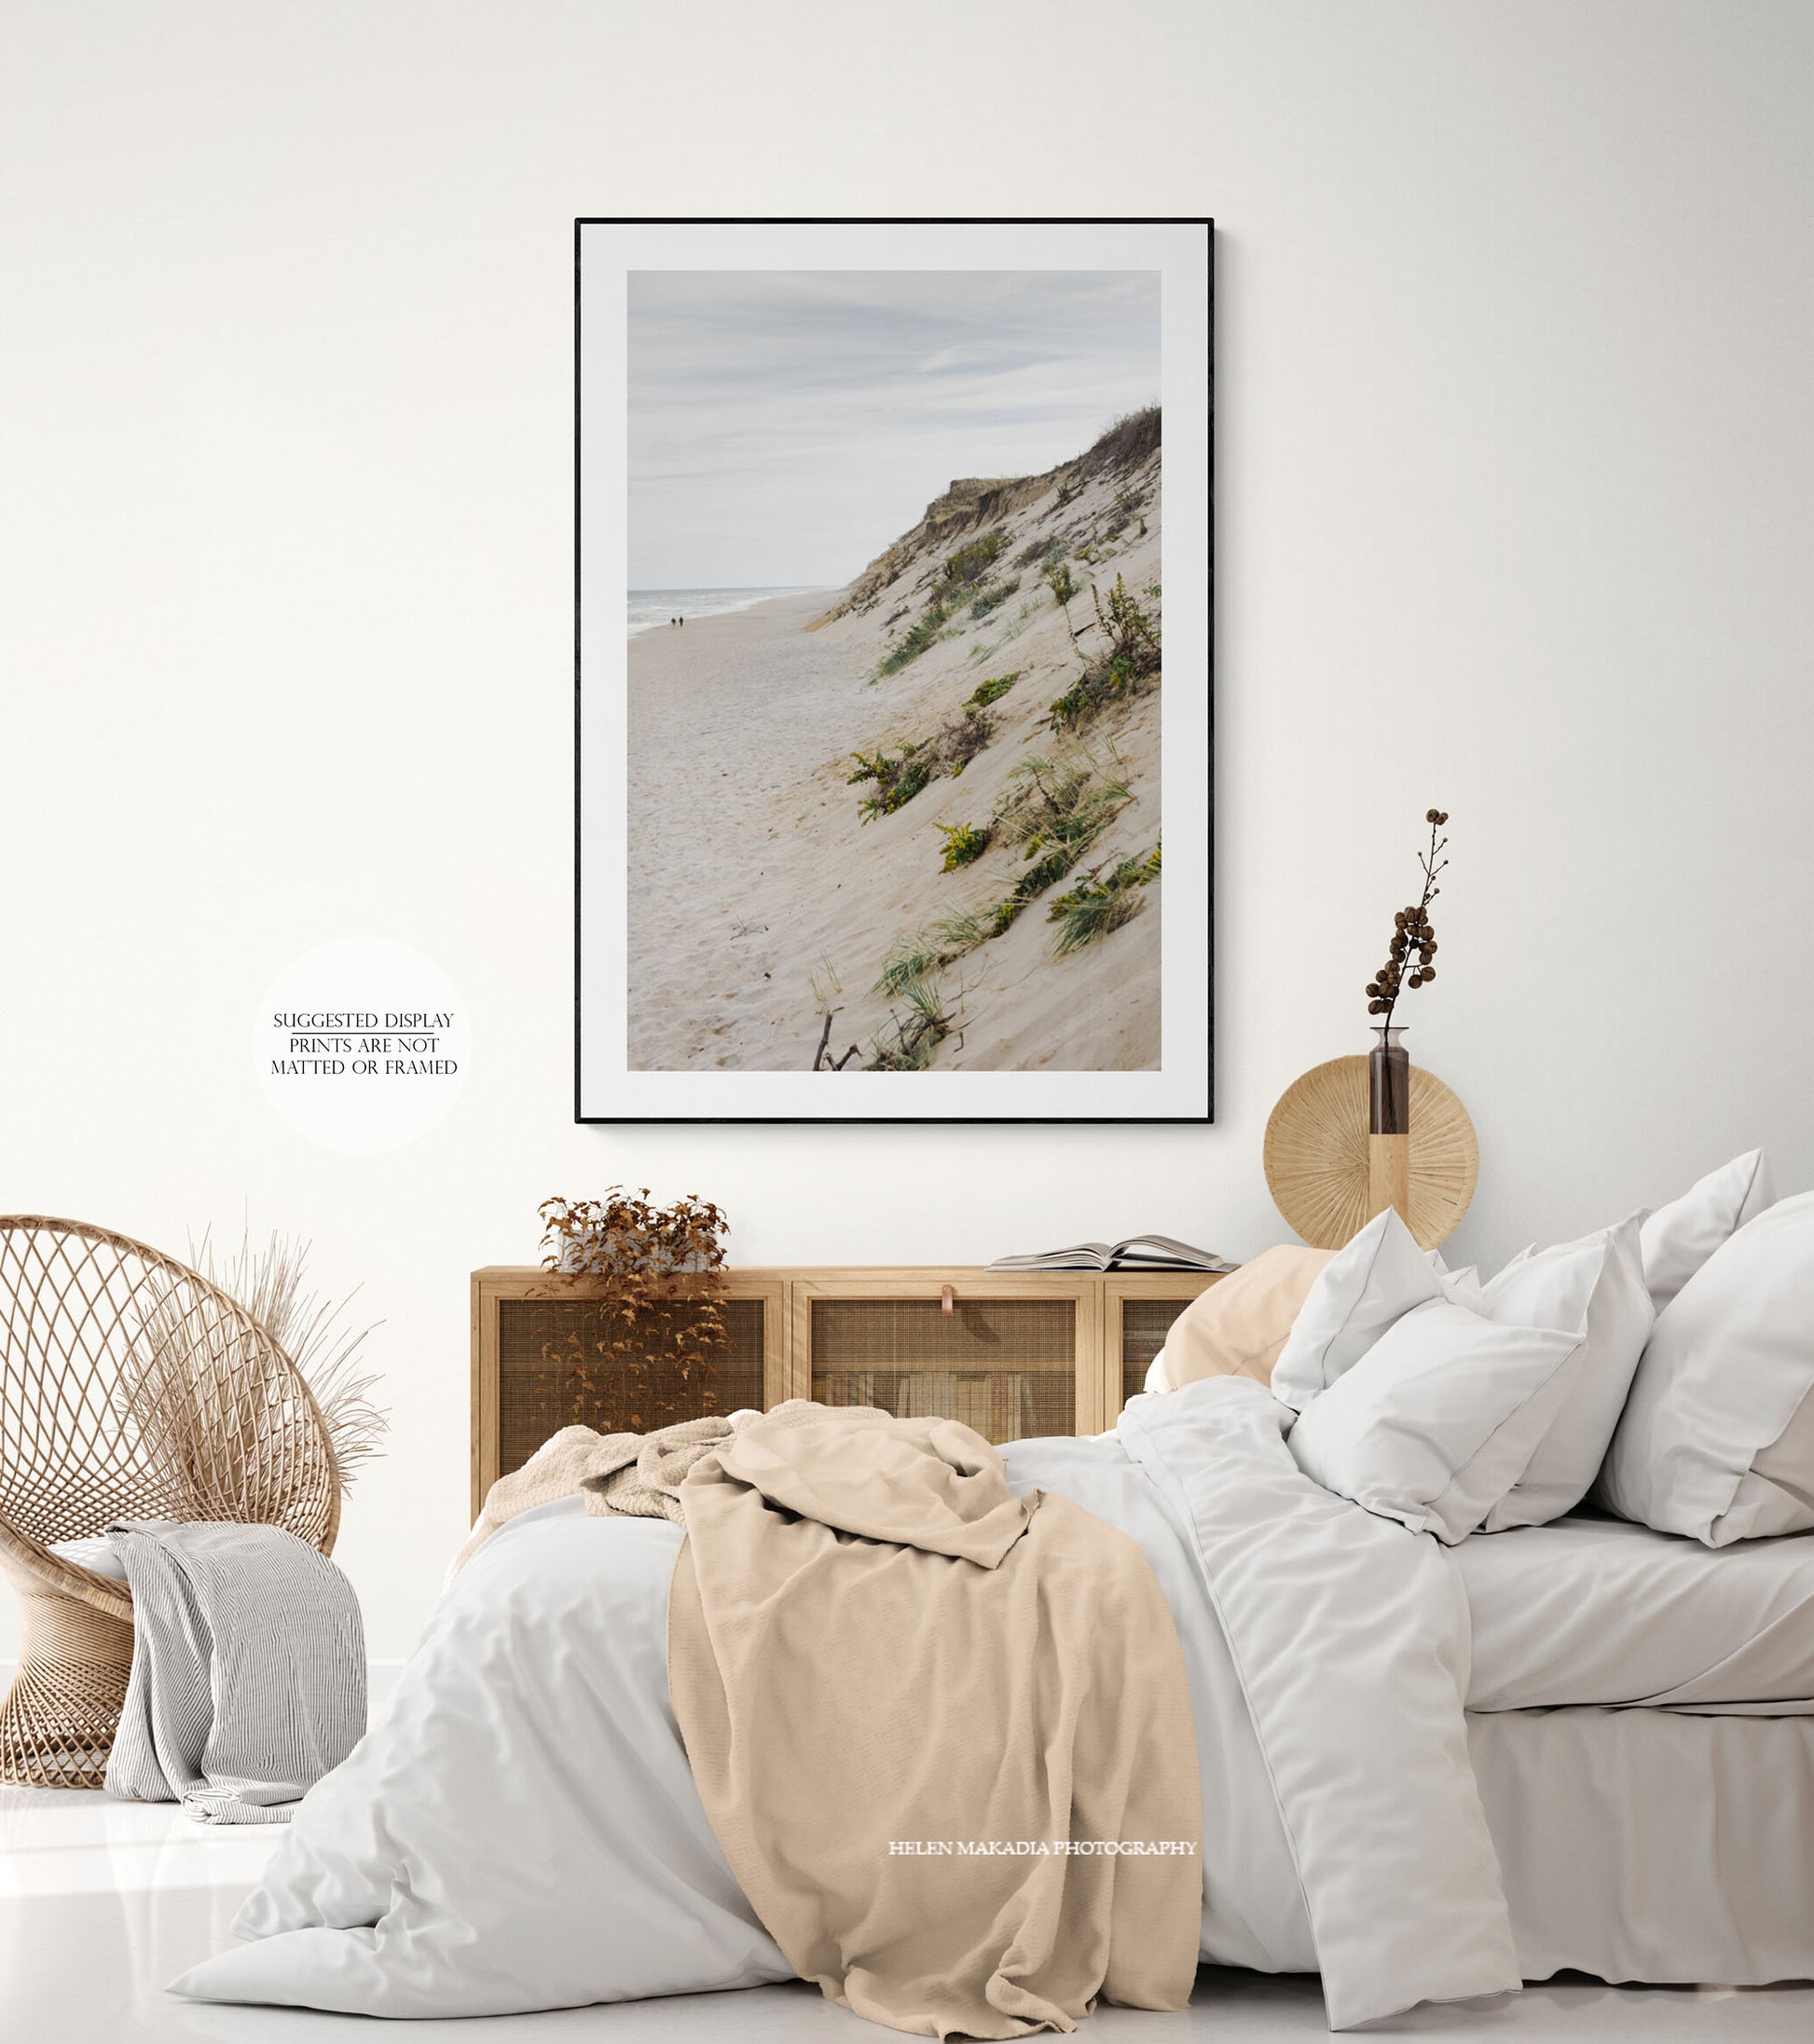 Marconi Cliffs and Beach Print Framed in a Bedroom